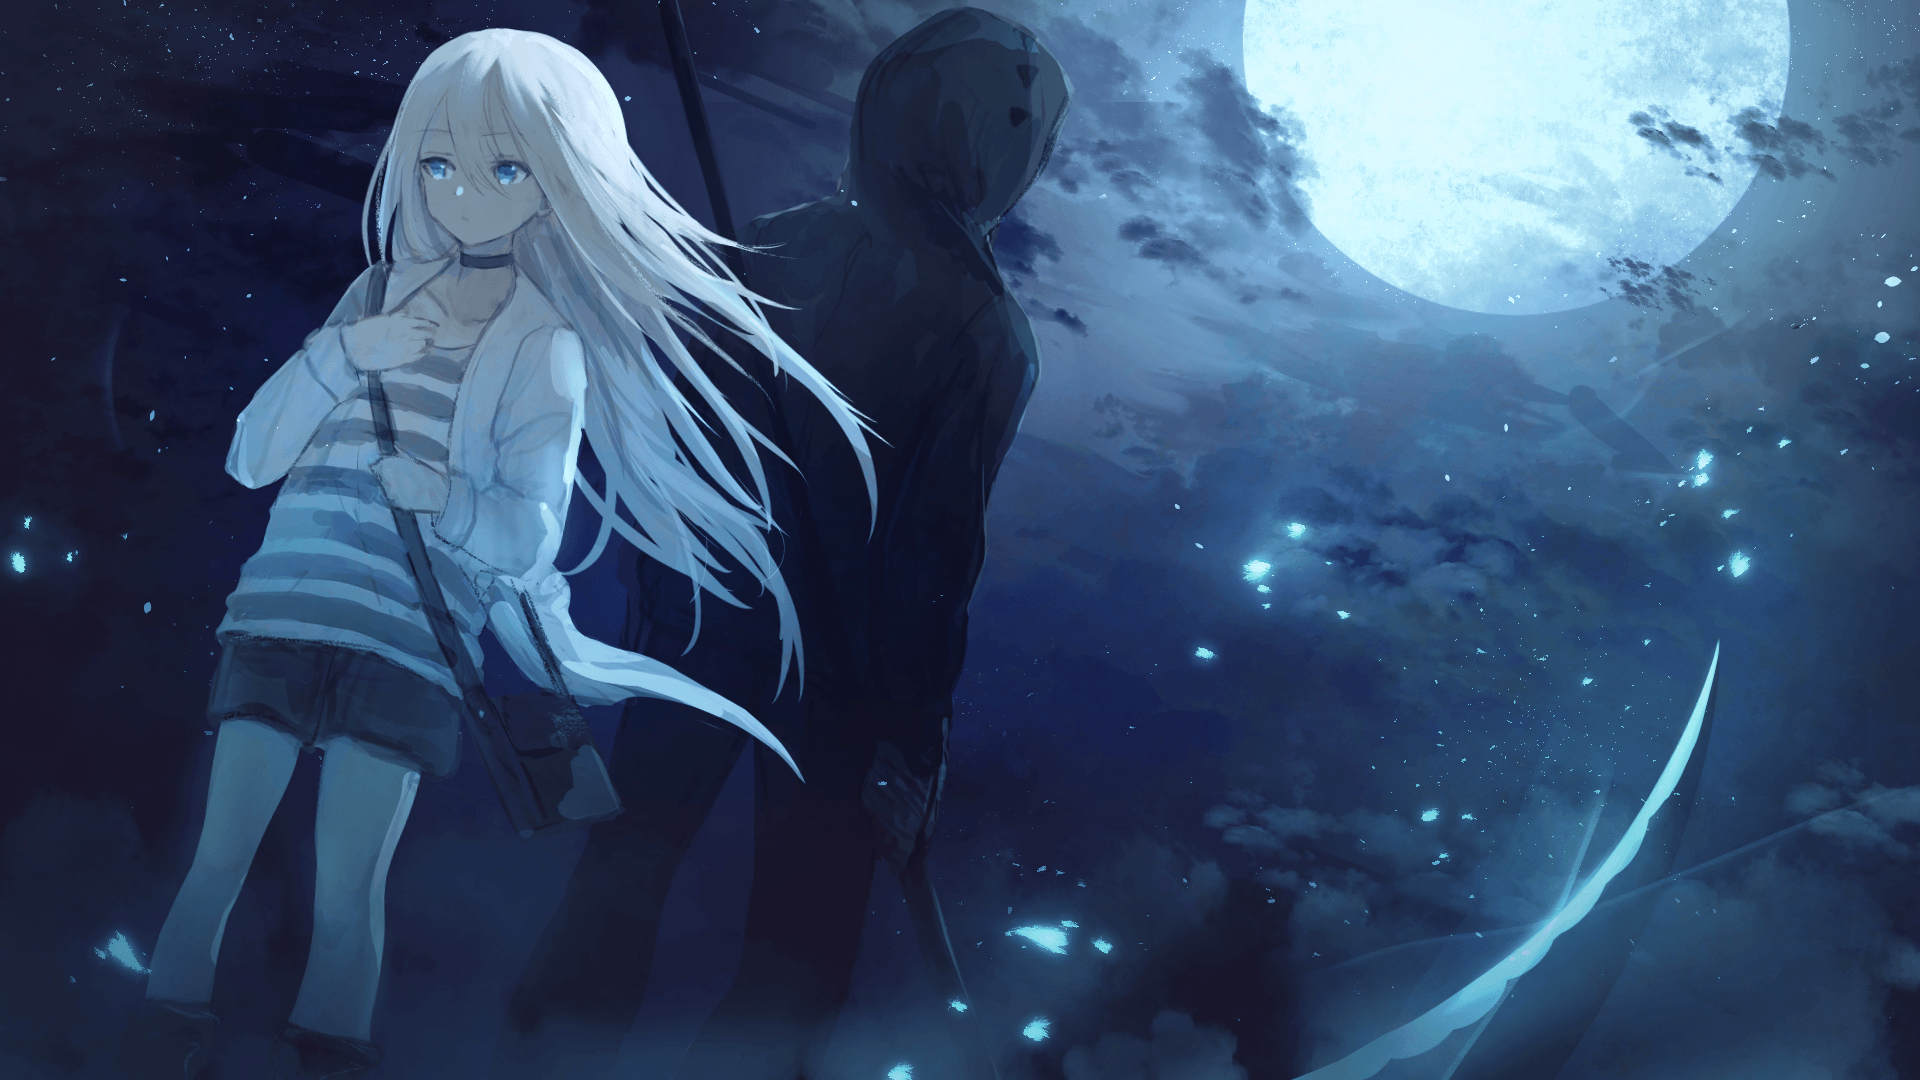 Anime Angels Of Death HD Wallpaper by Nahaki